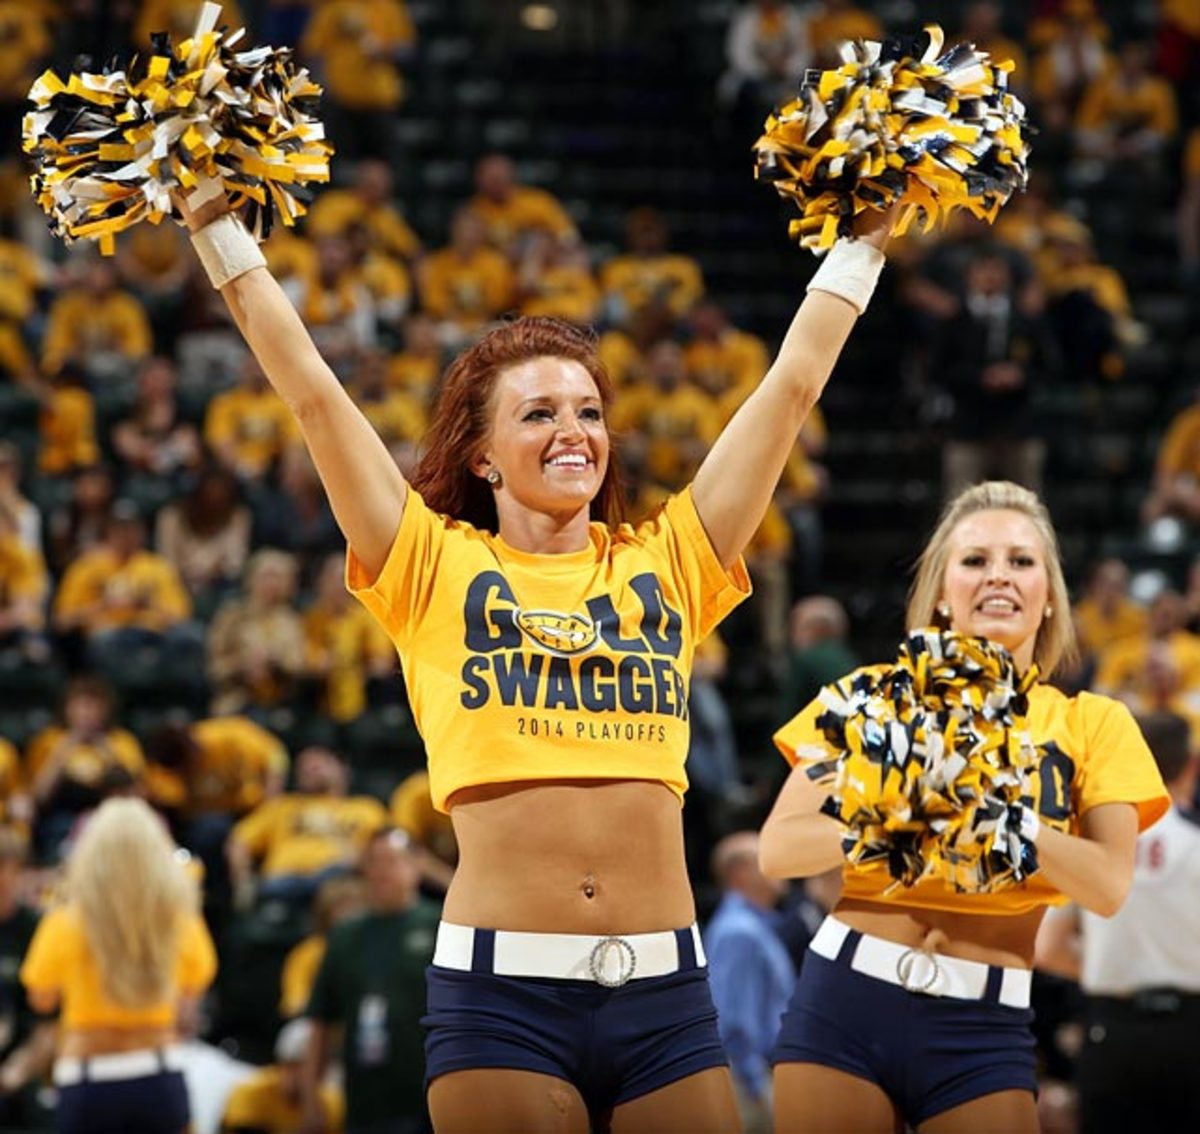 140512155839-indiana-pacers-pacemates-dancers-488352967-single-image-cut.jpg